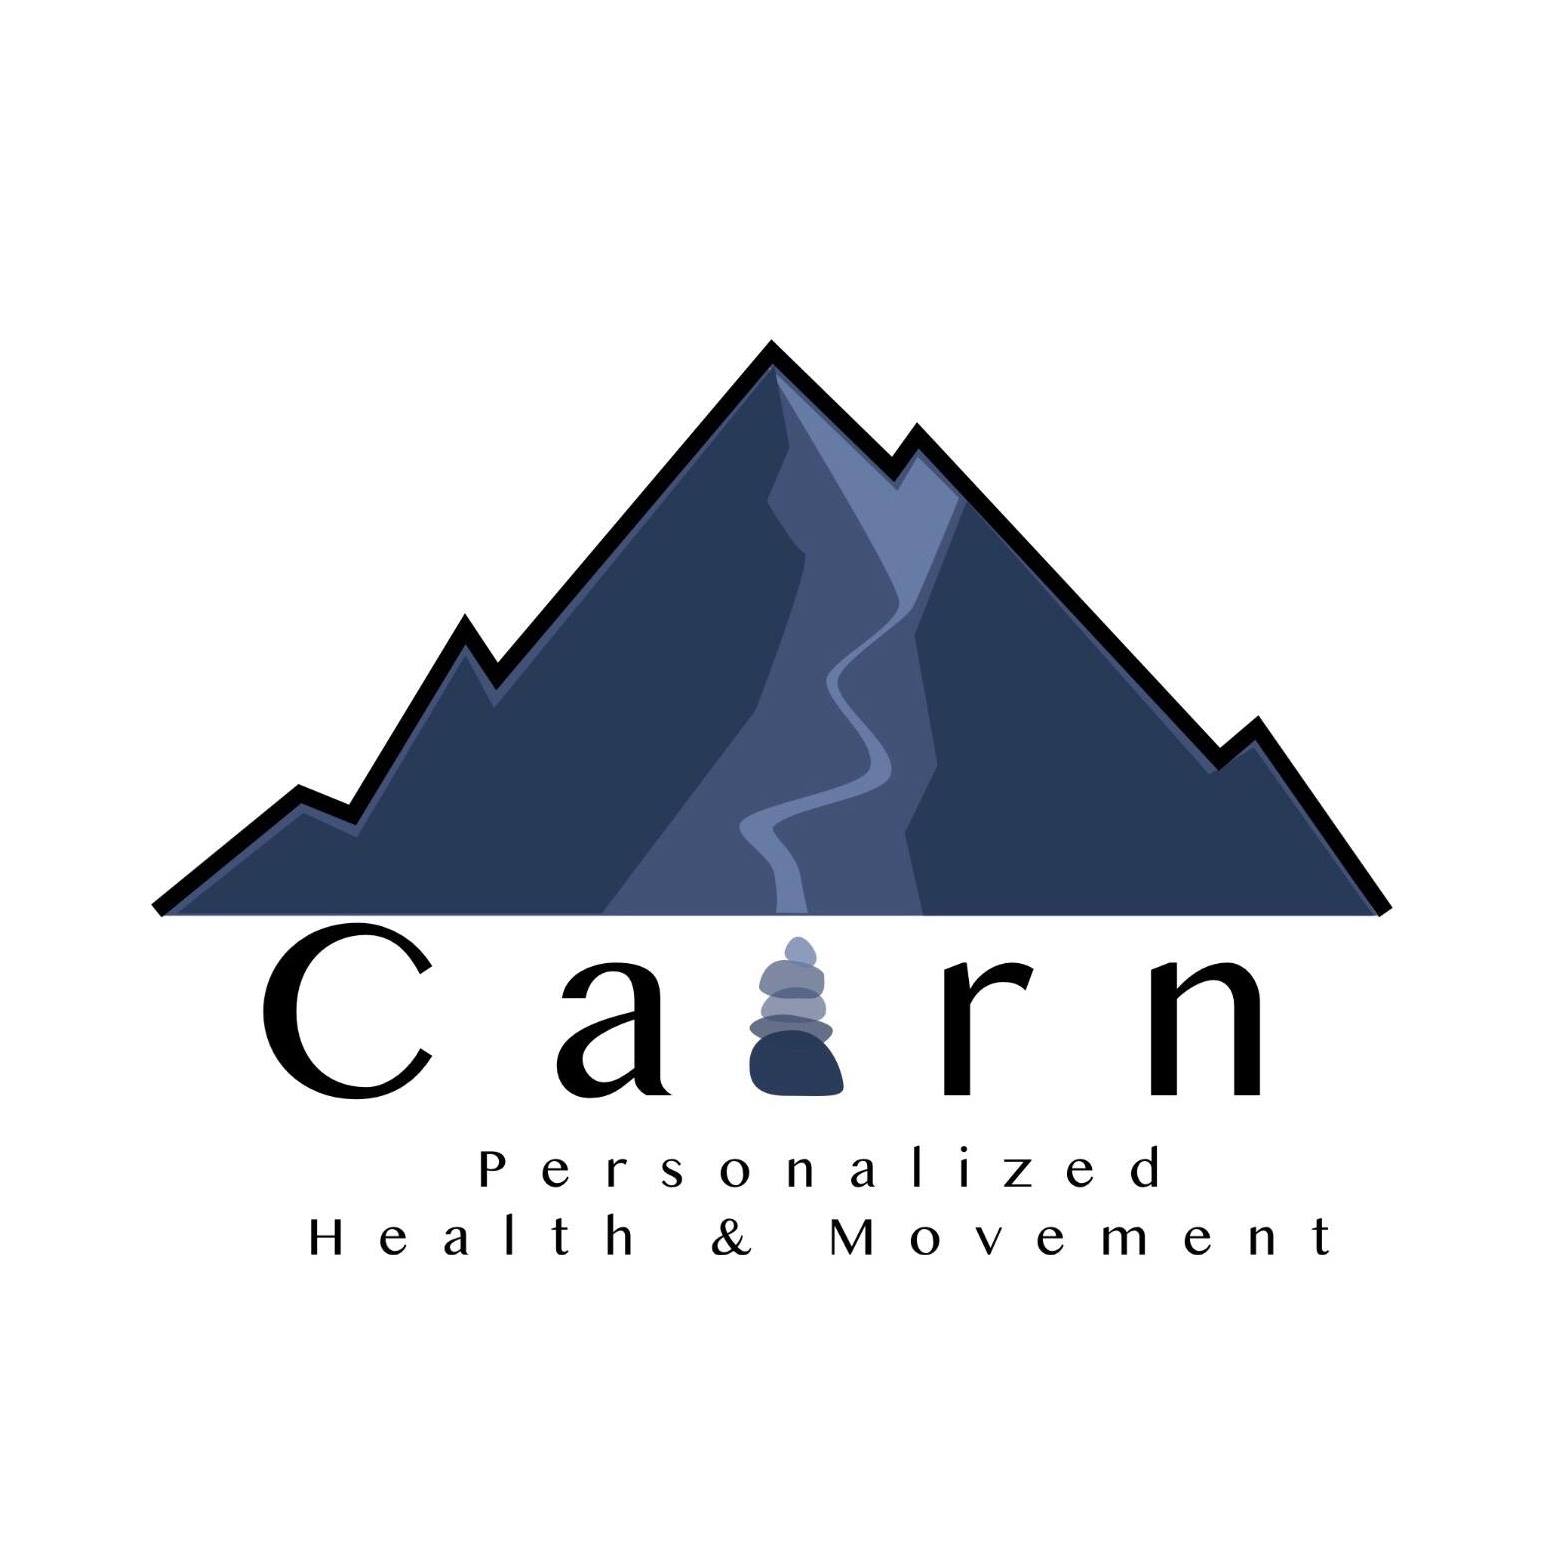 Cairn Personalized Health and Movement